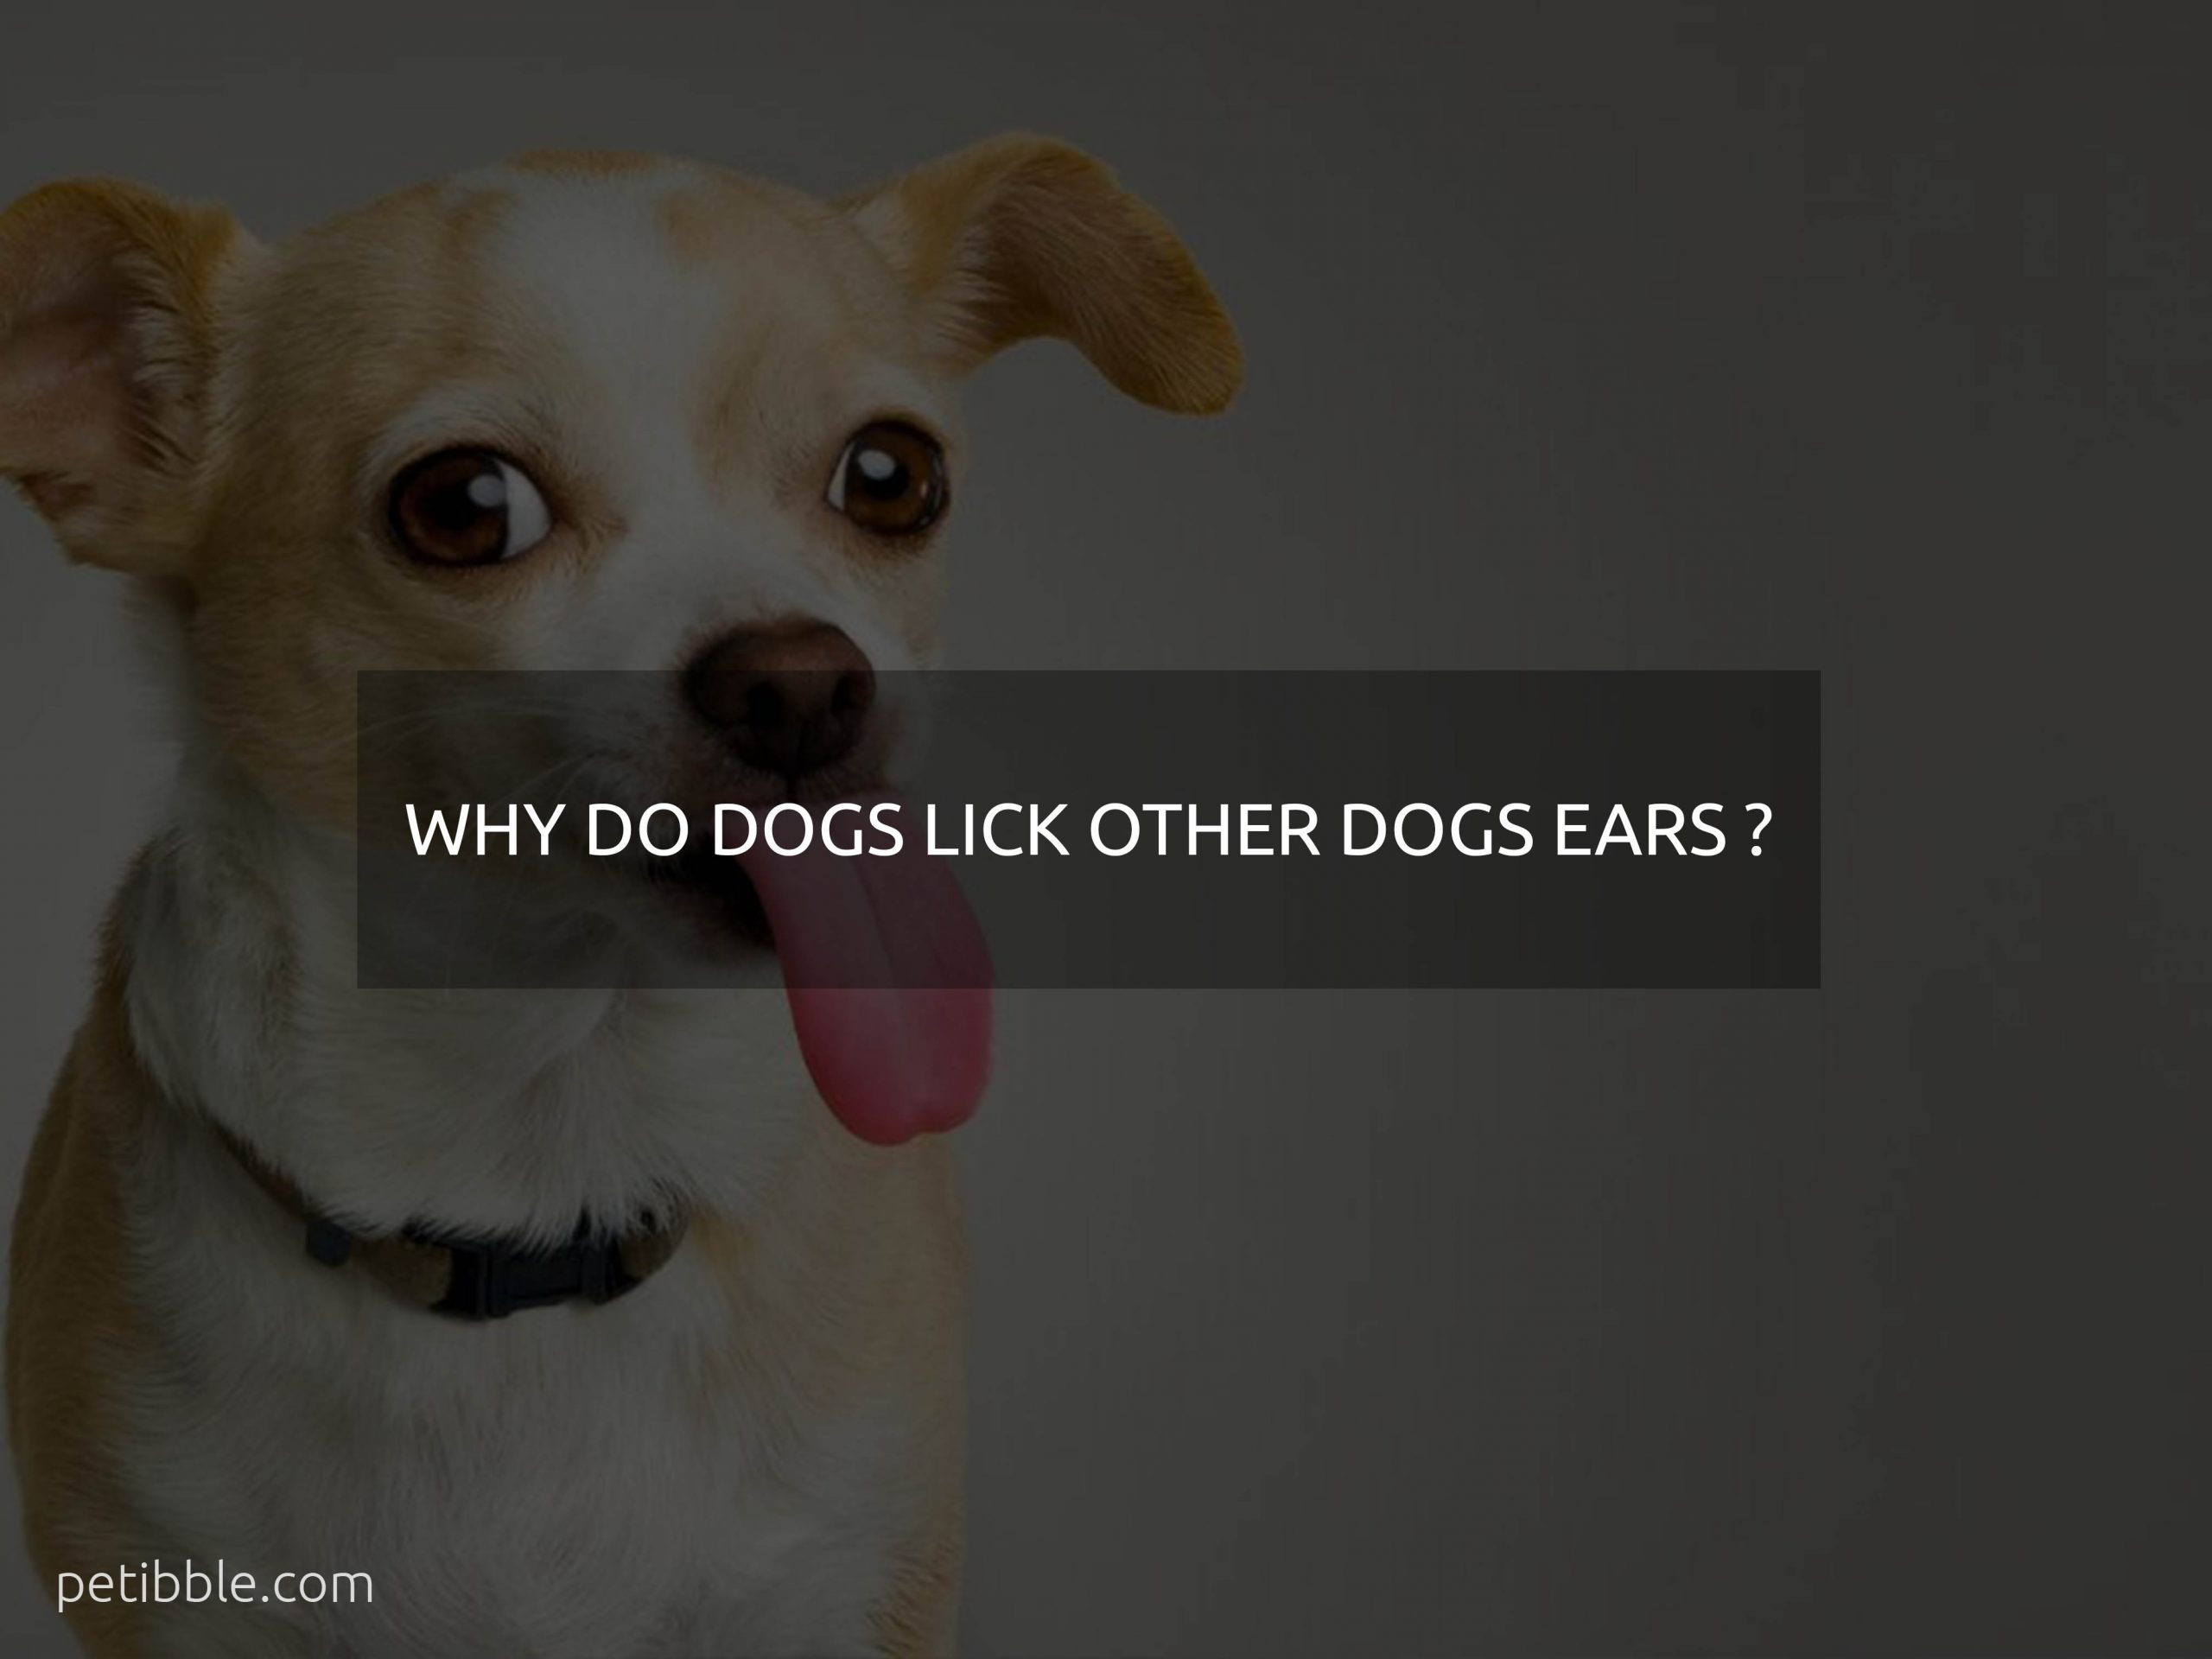 why do dogs lick other dogs ears?